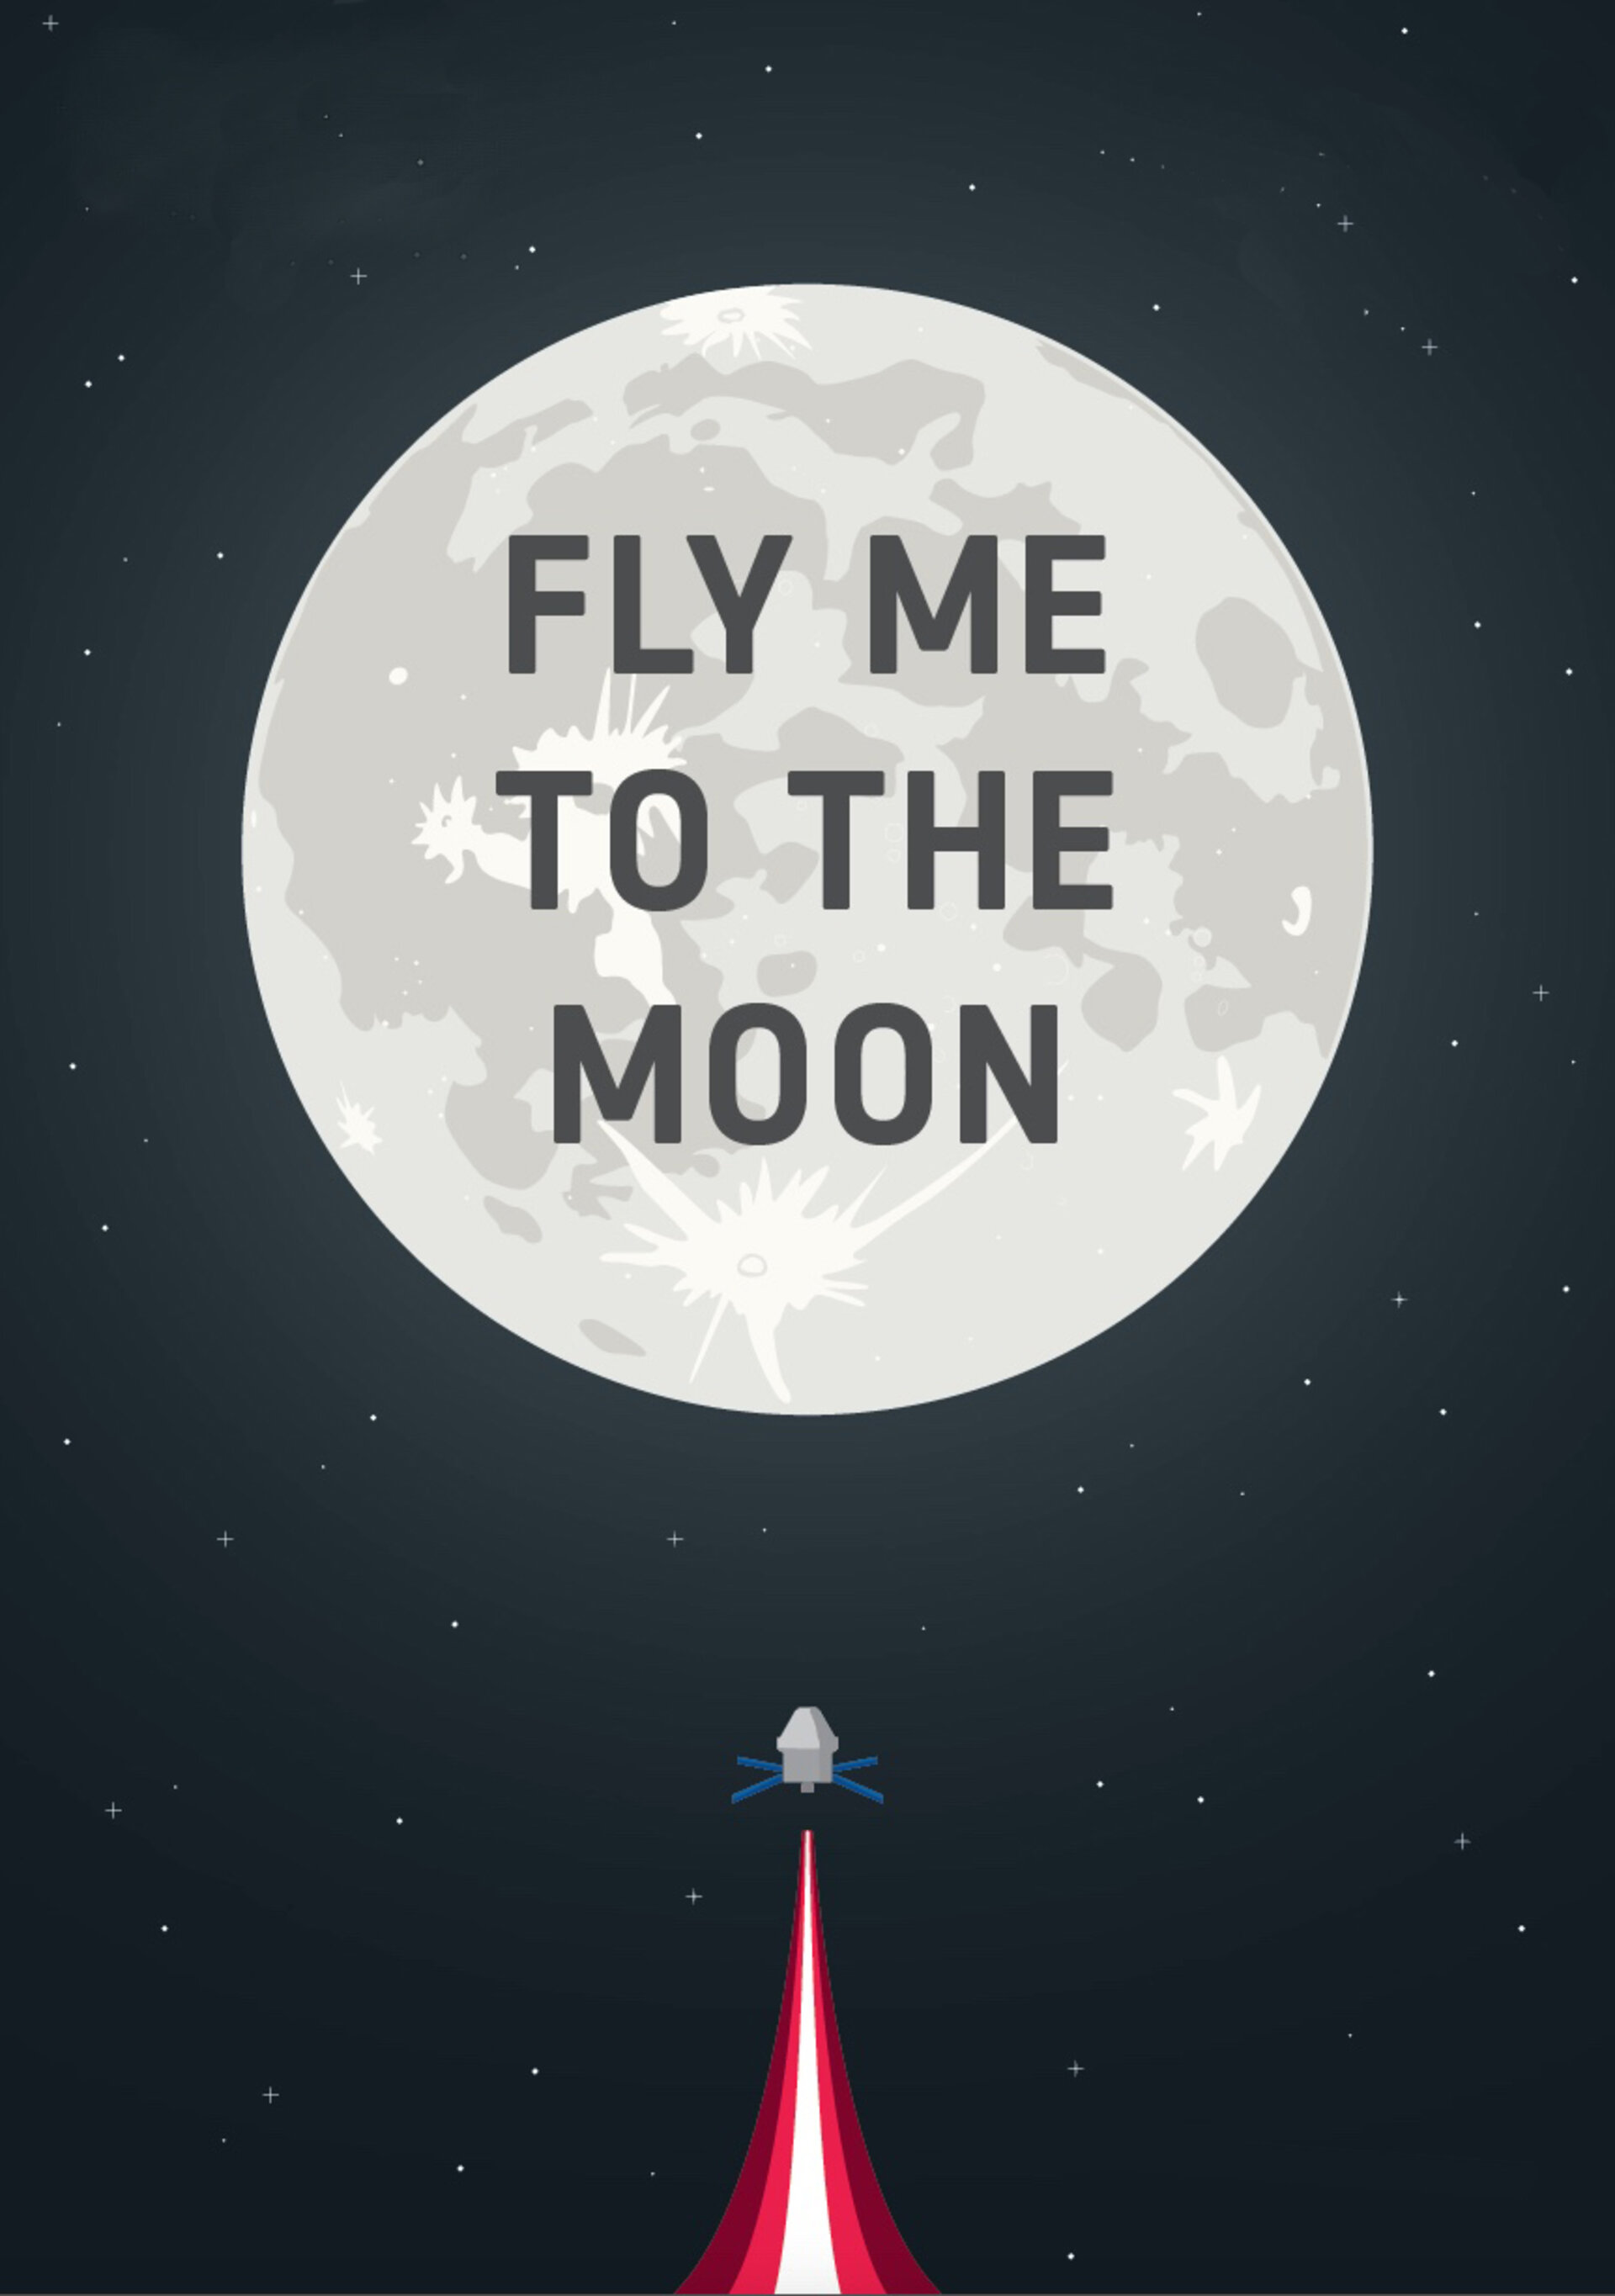 The fly moon to me “Fly Me